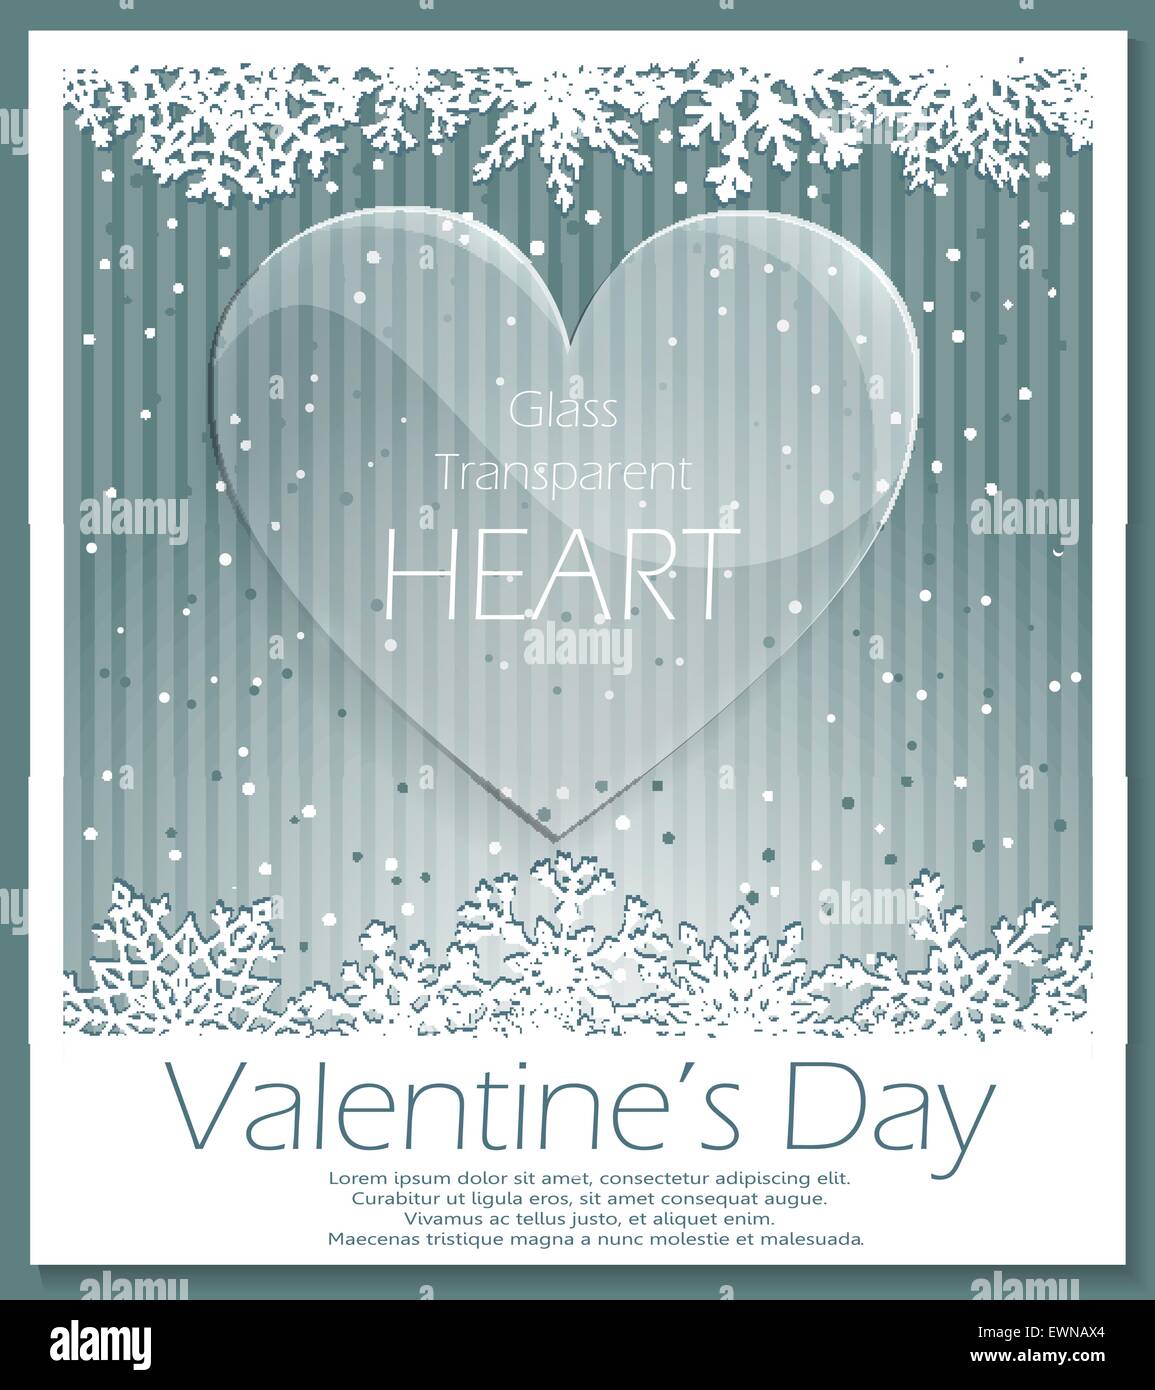 Valentines Day glass transparent heart over striped snowing background. Love background. Vector eps10. Stock Vector